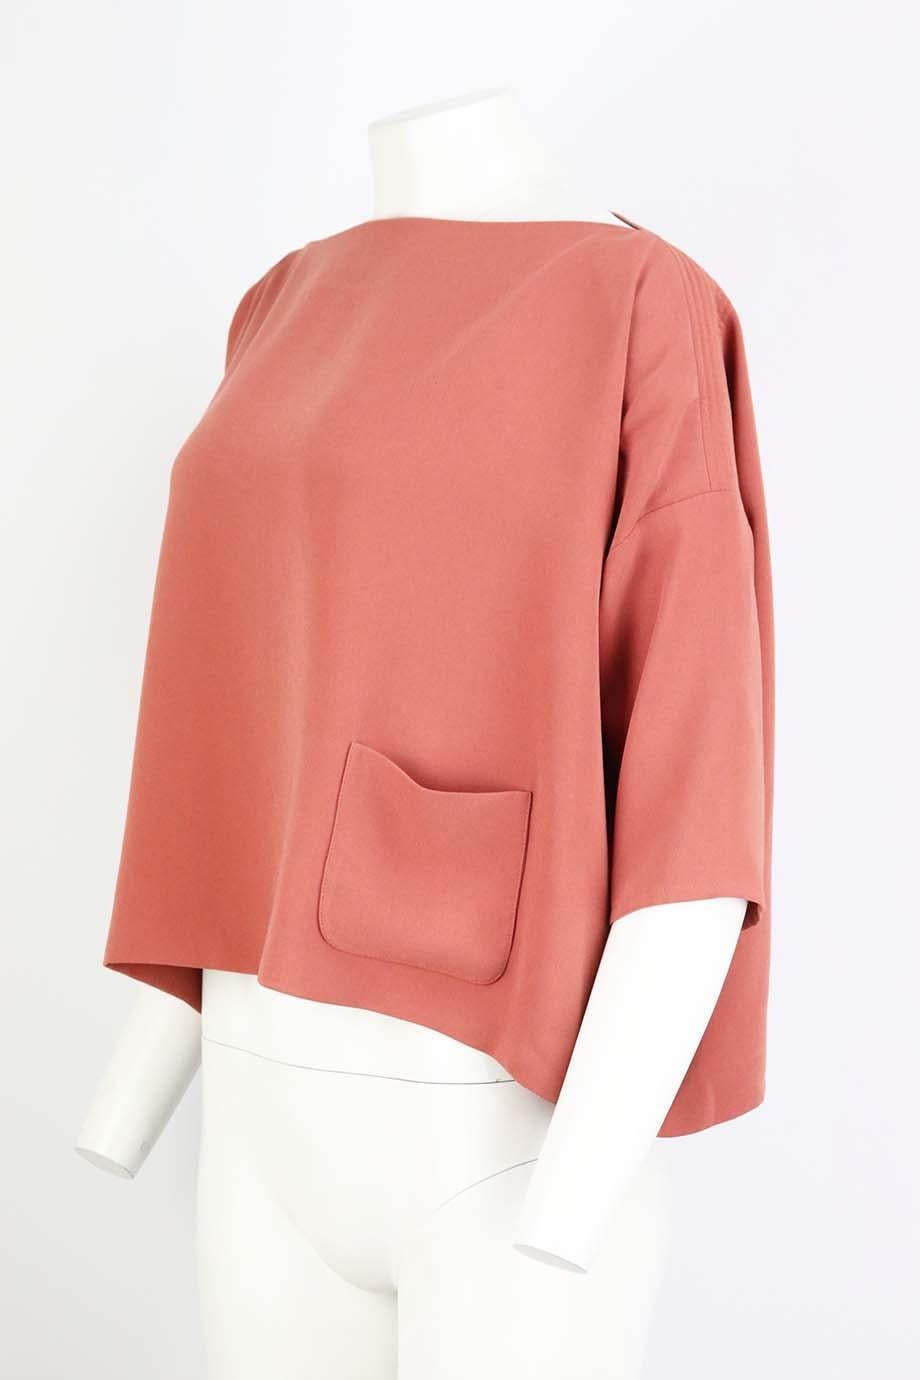 This top by Balenciaga is cut from stretch-crepe in a boxy silhouette - playing with proportion is a longstanding brand signature, it’s finished with a pocket on the front. Dusty-peach silk. Slip on. 60% Triacetate, 40% polyester. Size: FR 36 (UK 8,